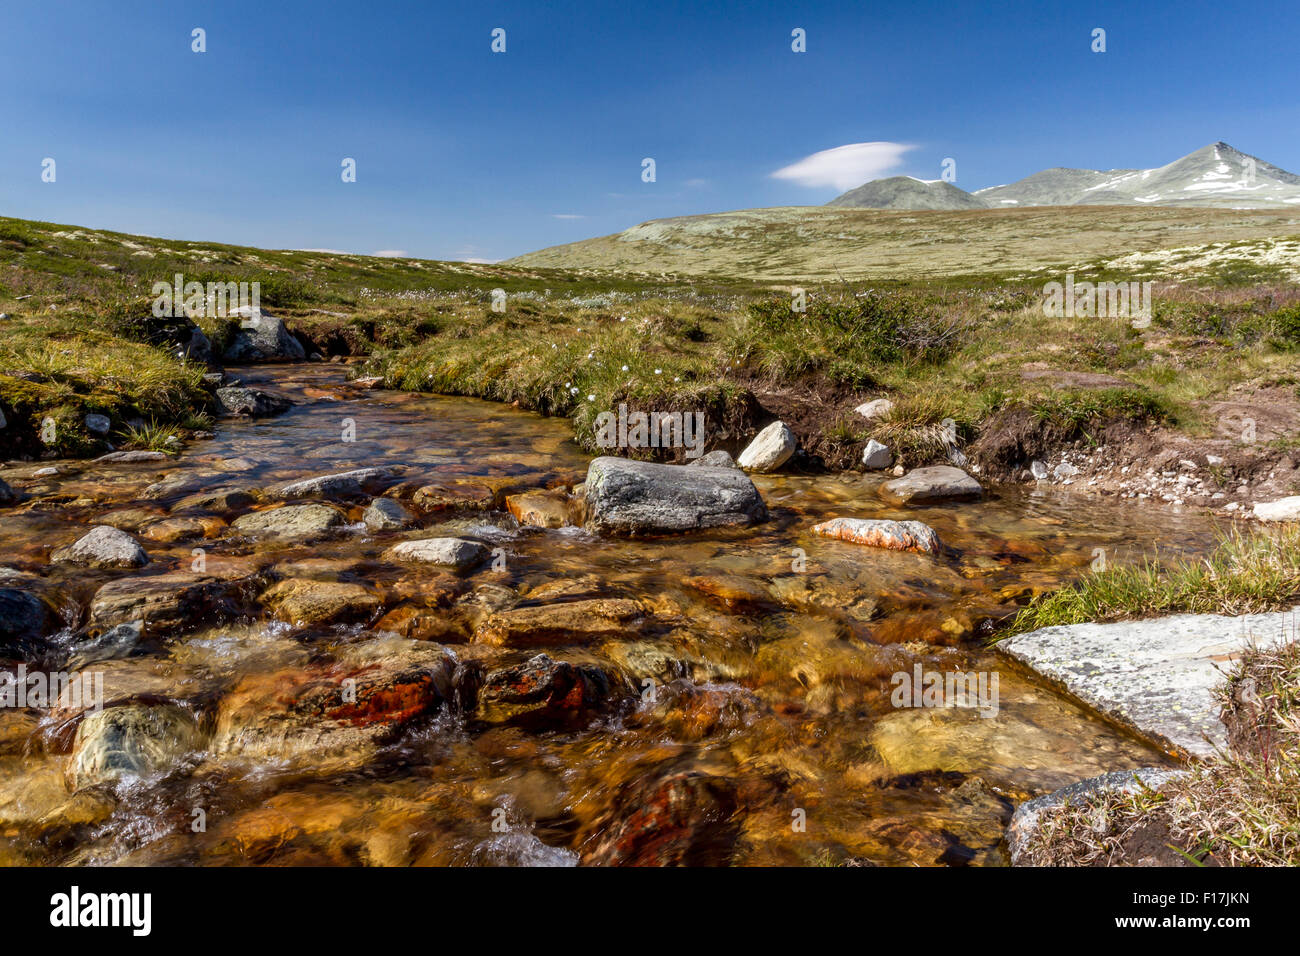 River in Rondane national park, Norway Stock Photo